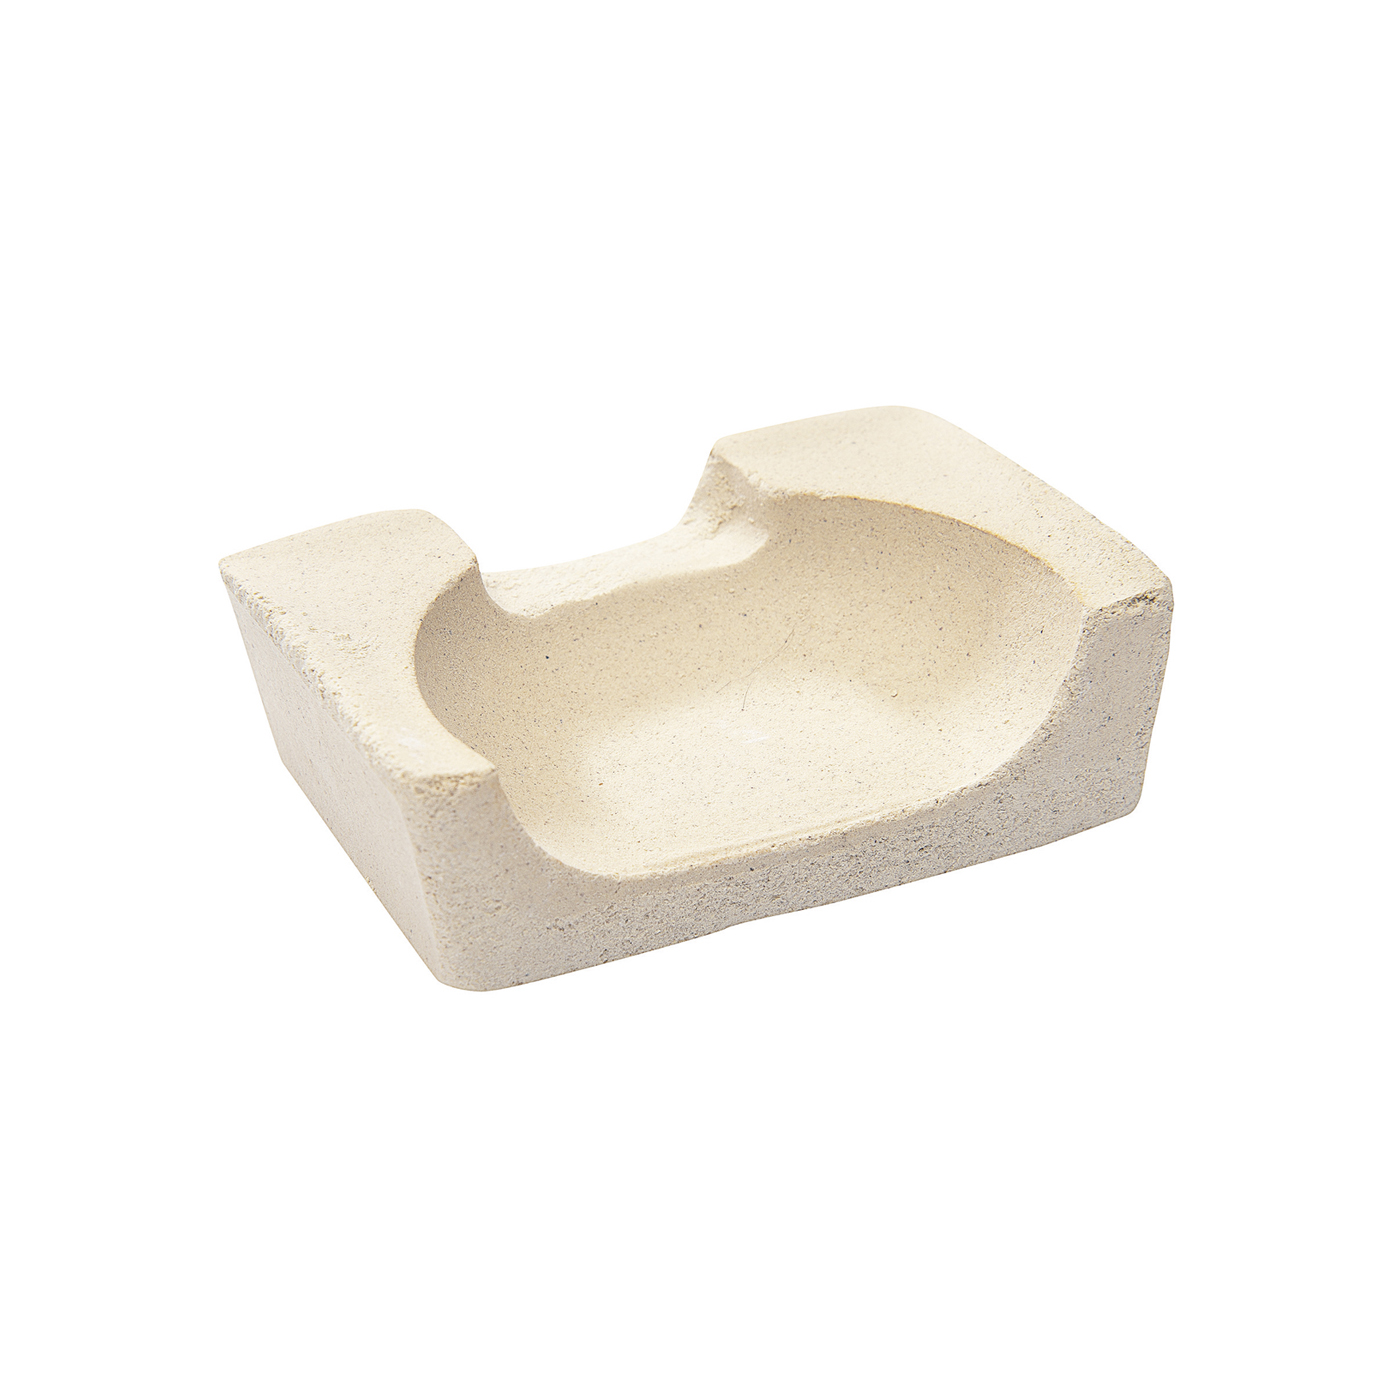 Lid for Crucible, 65 x 65 x 16 mm - 1 piece